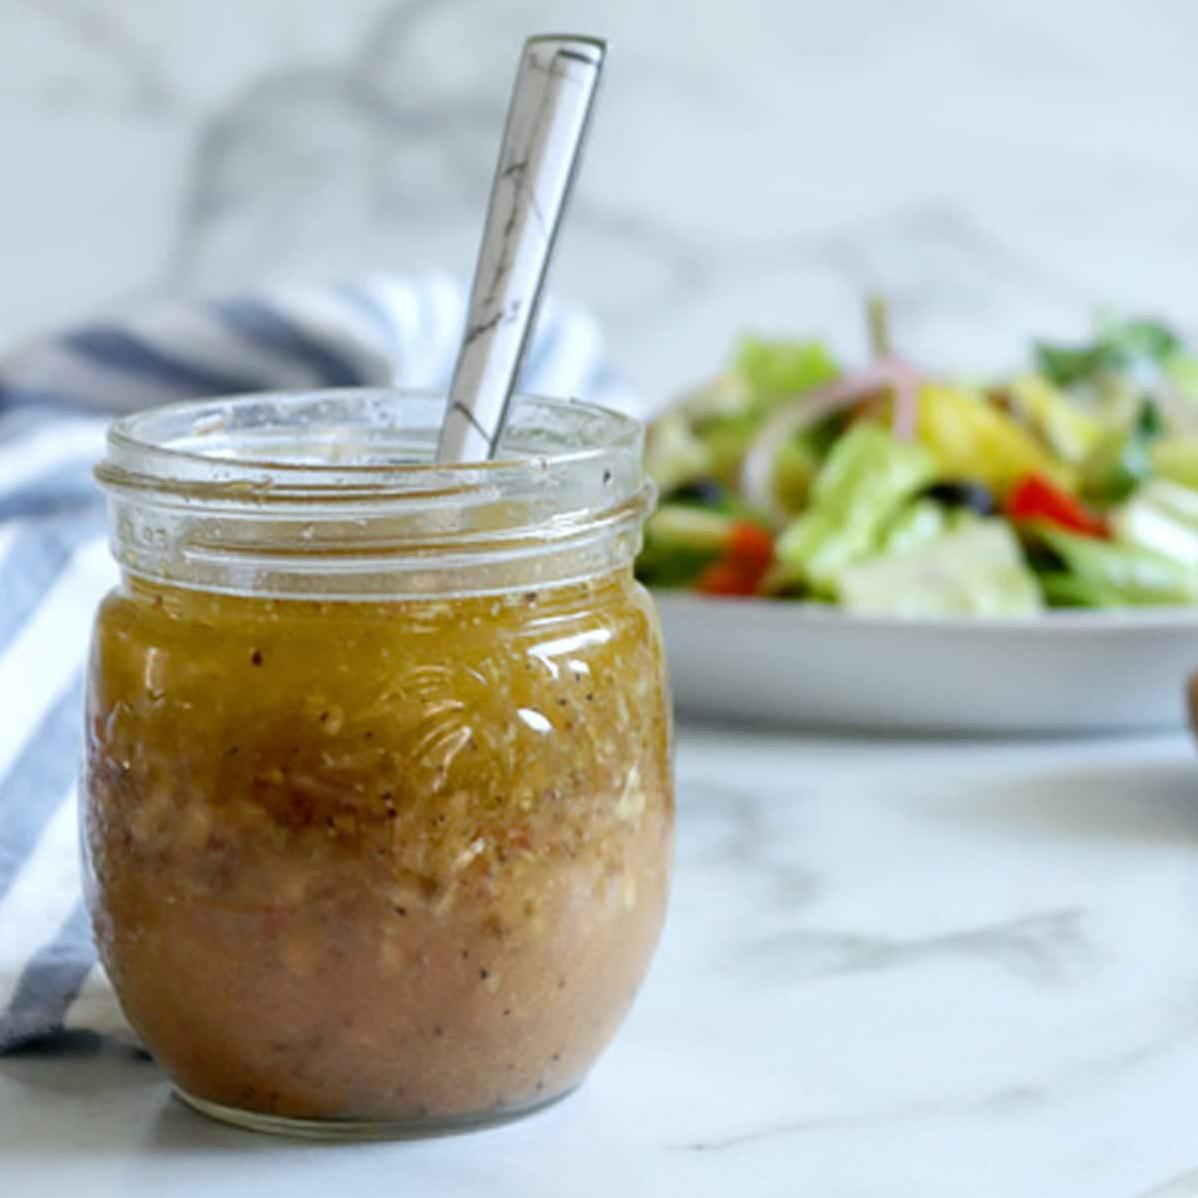  Drizzle this delightful, dairy-free Italian dressing on your fresh veggies and salads